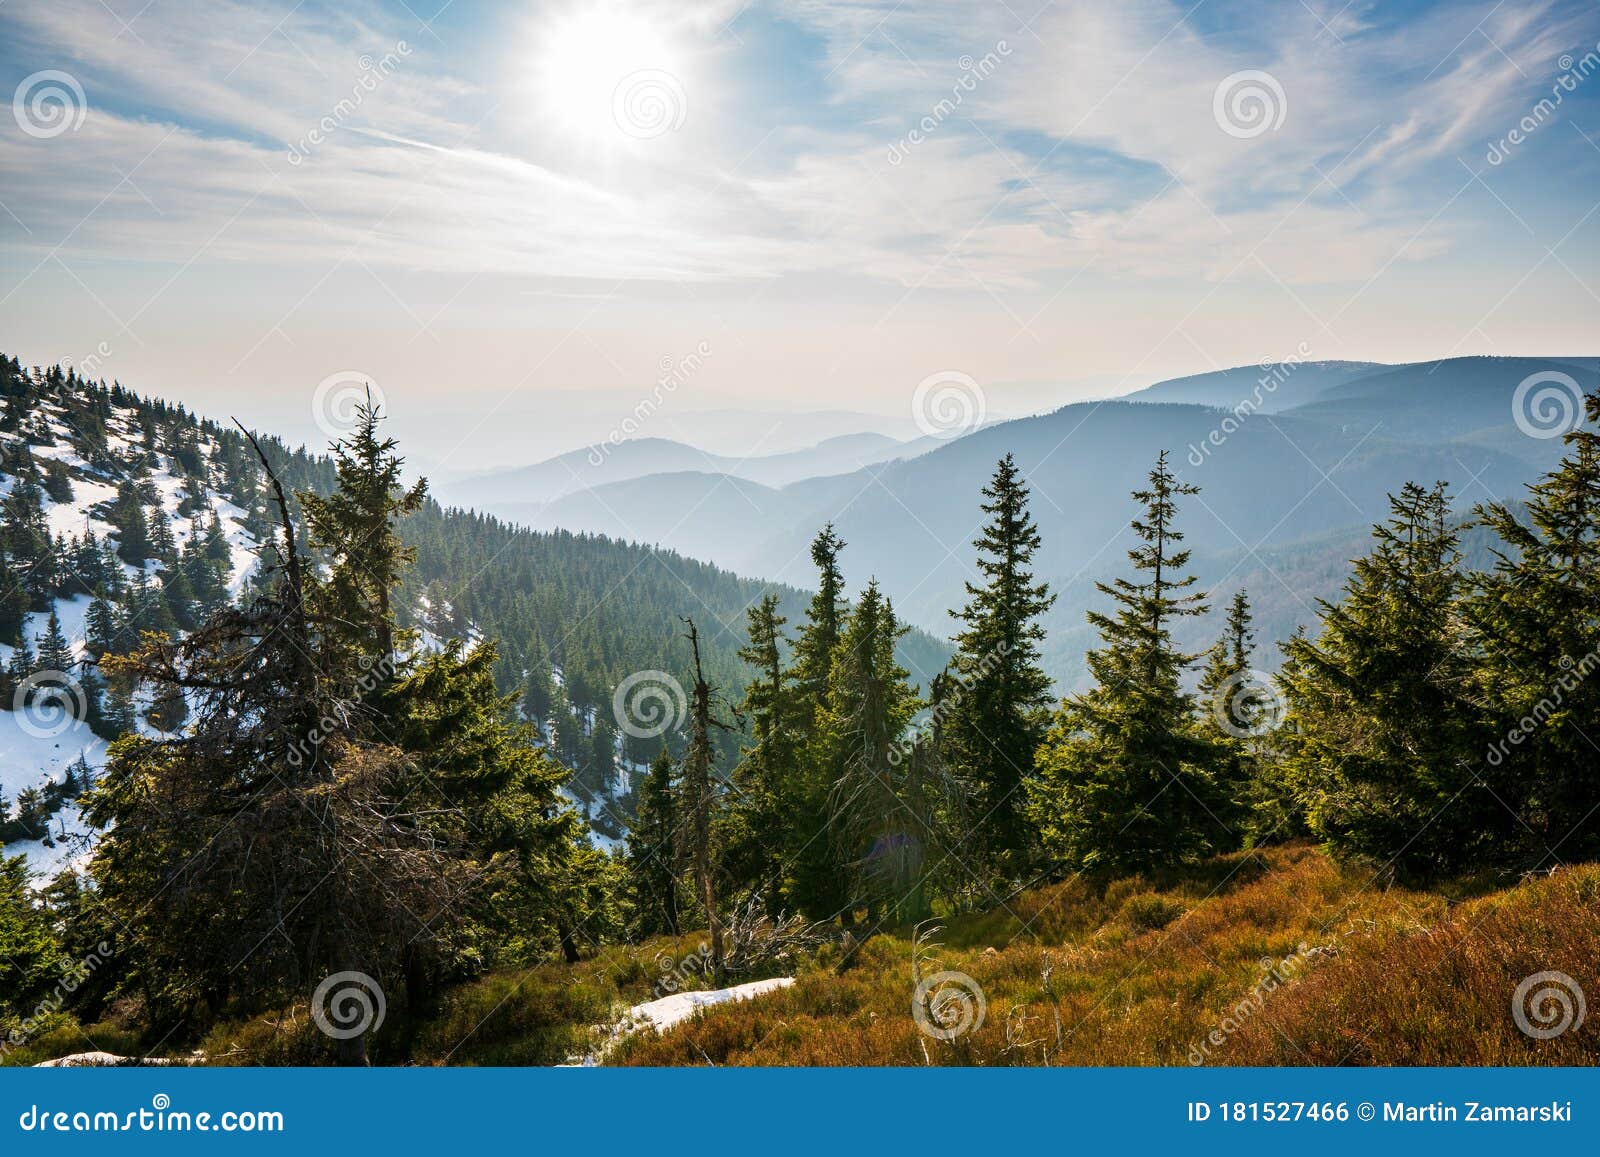 view of the valley with hills and fog and beautiful sky with the sun, hiking in the mountains, "czech jeseniky velkÃÂ½ mÃÂ¡j